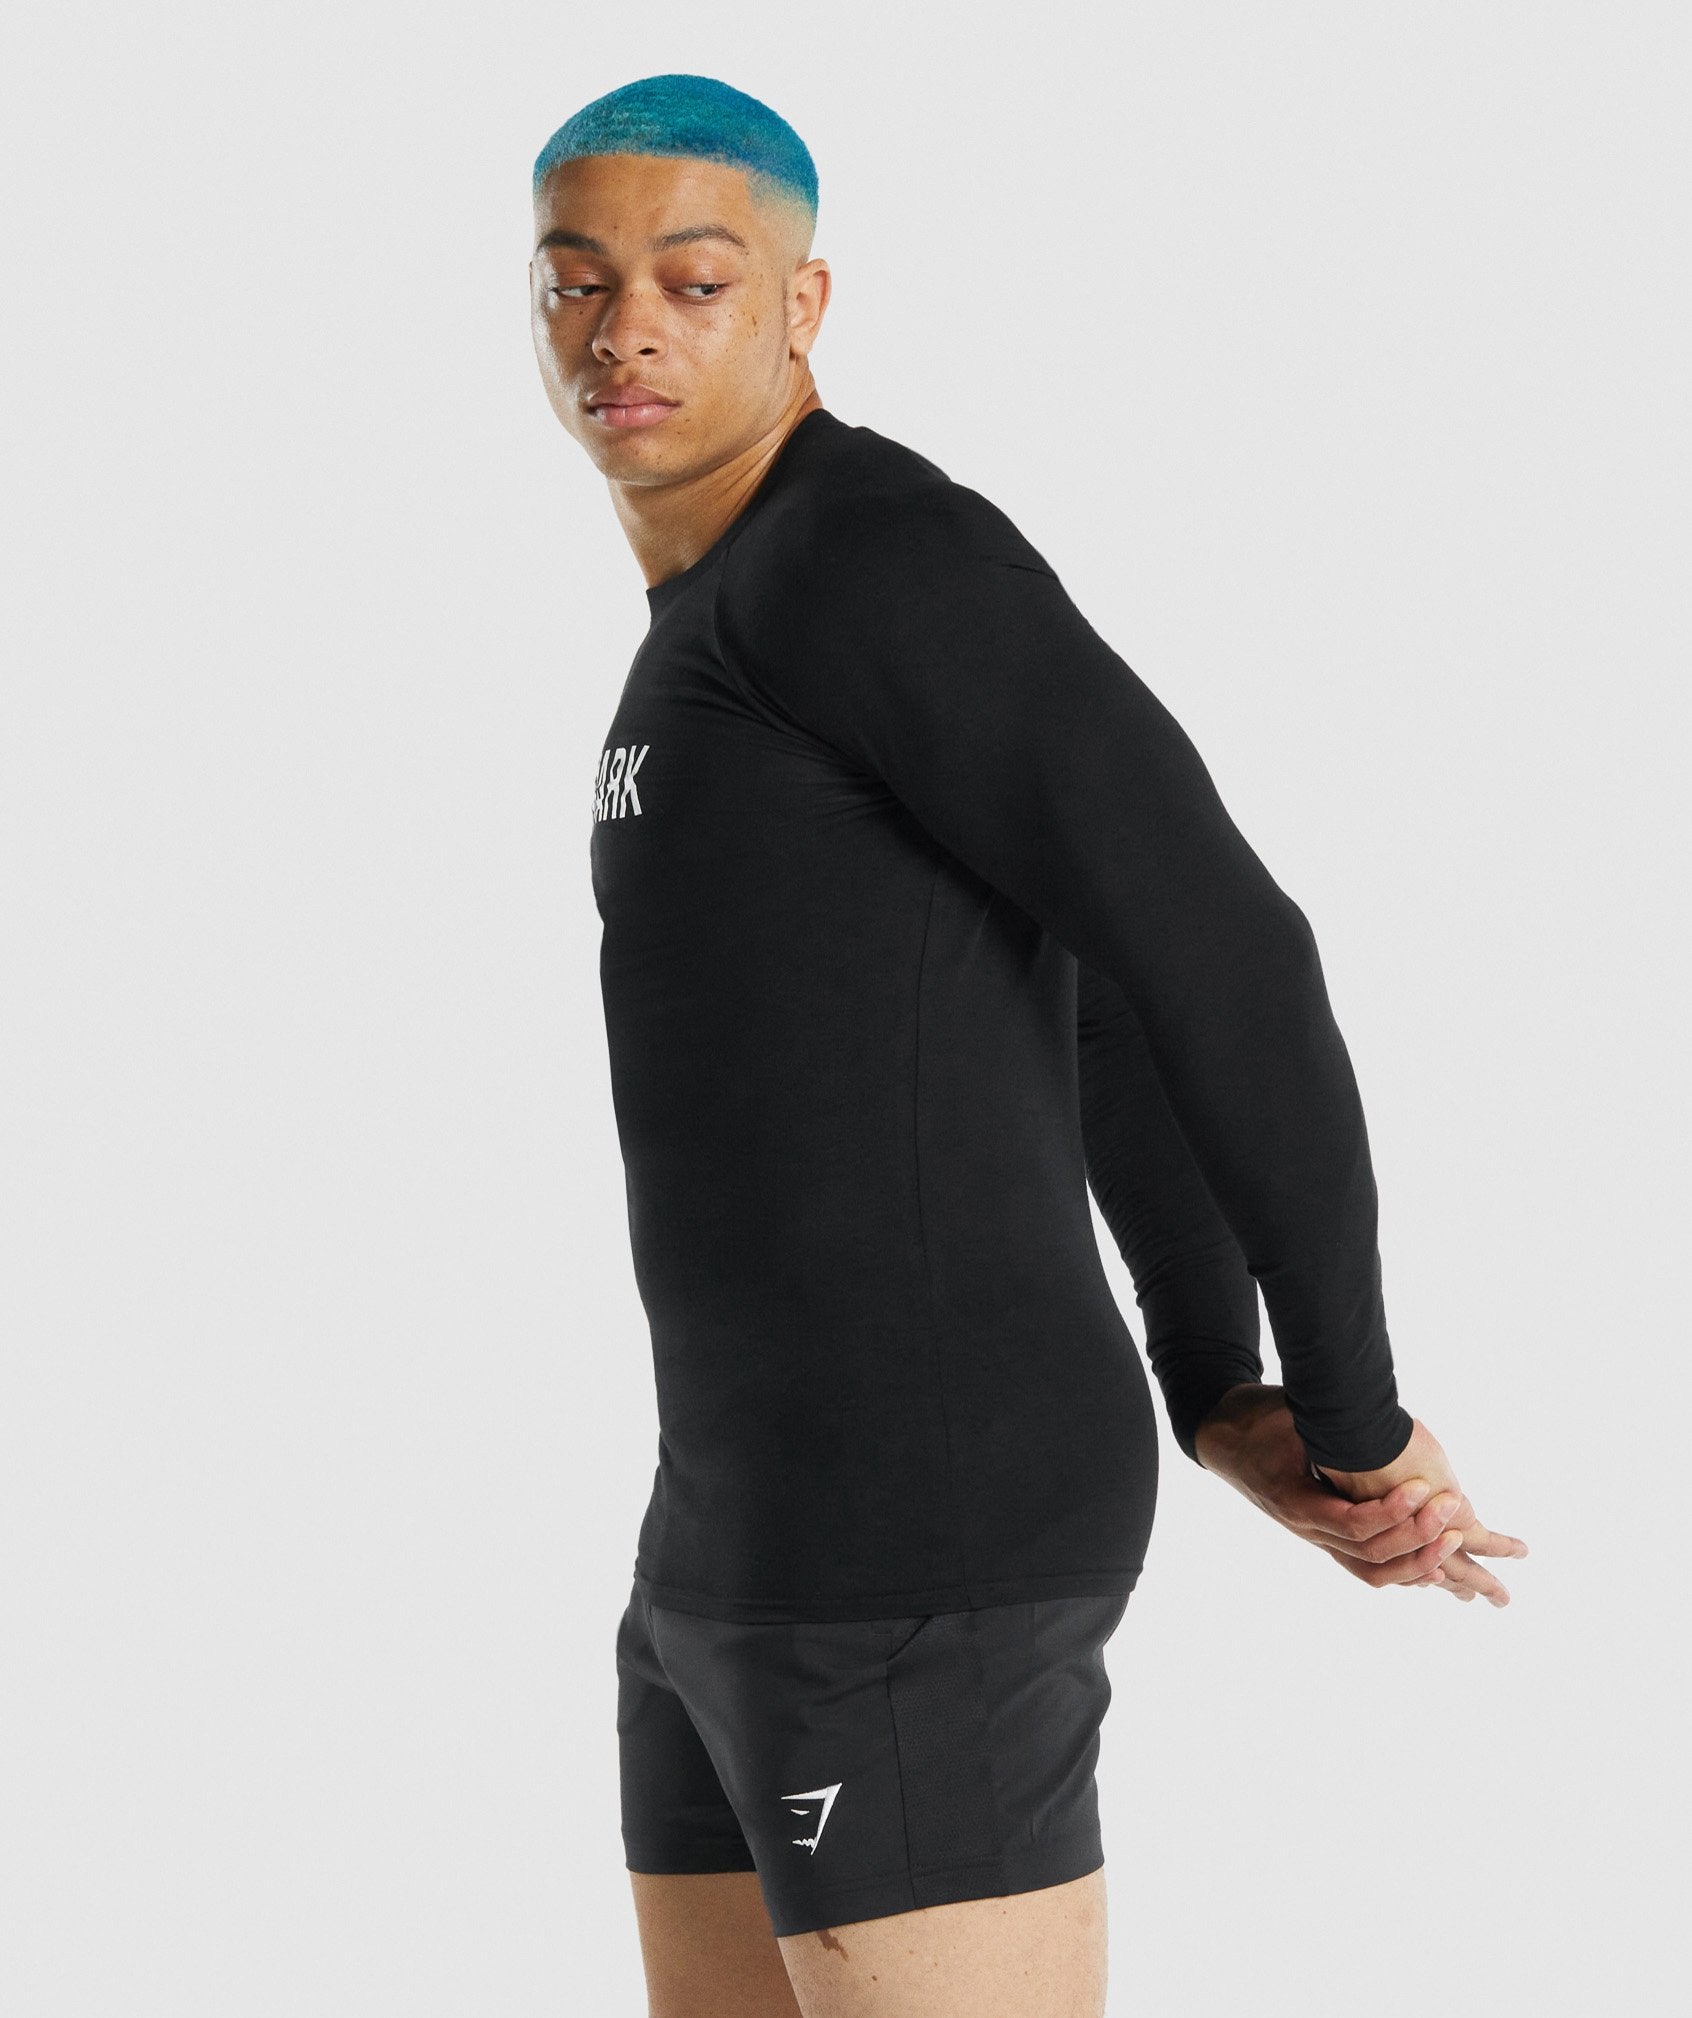 Apollo Long Sleeve T-Shirt in Black - view 4